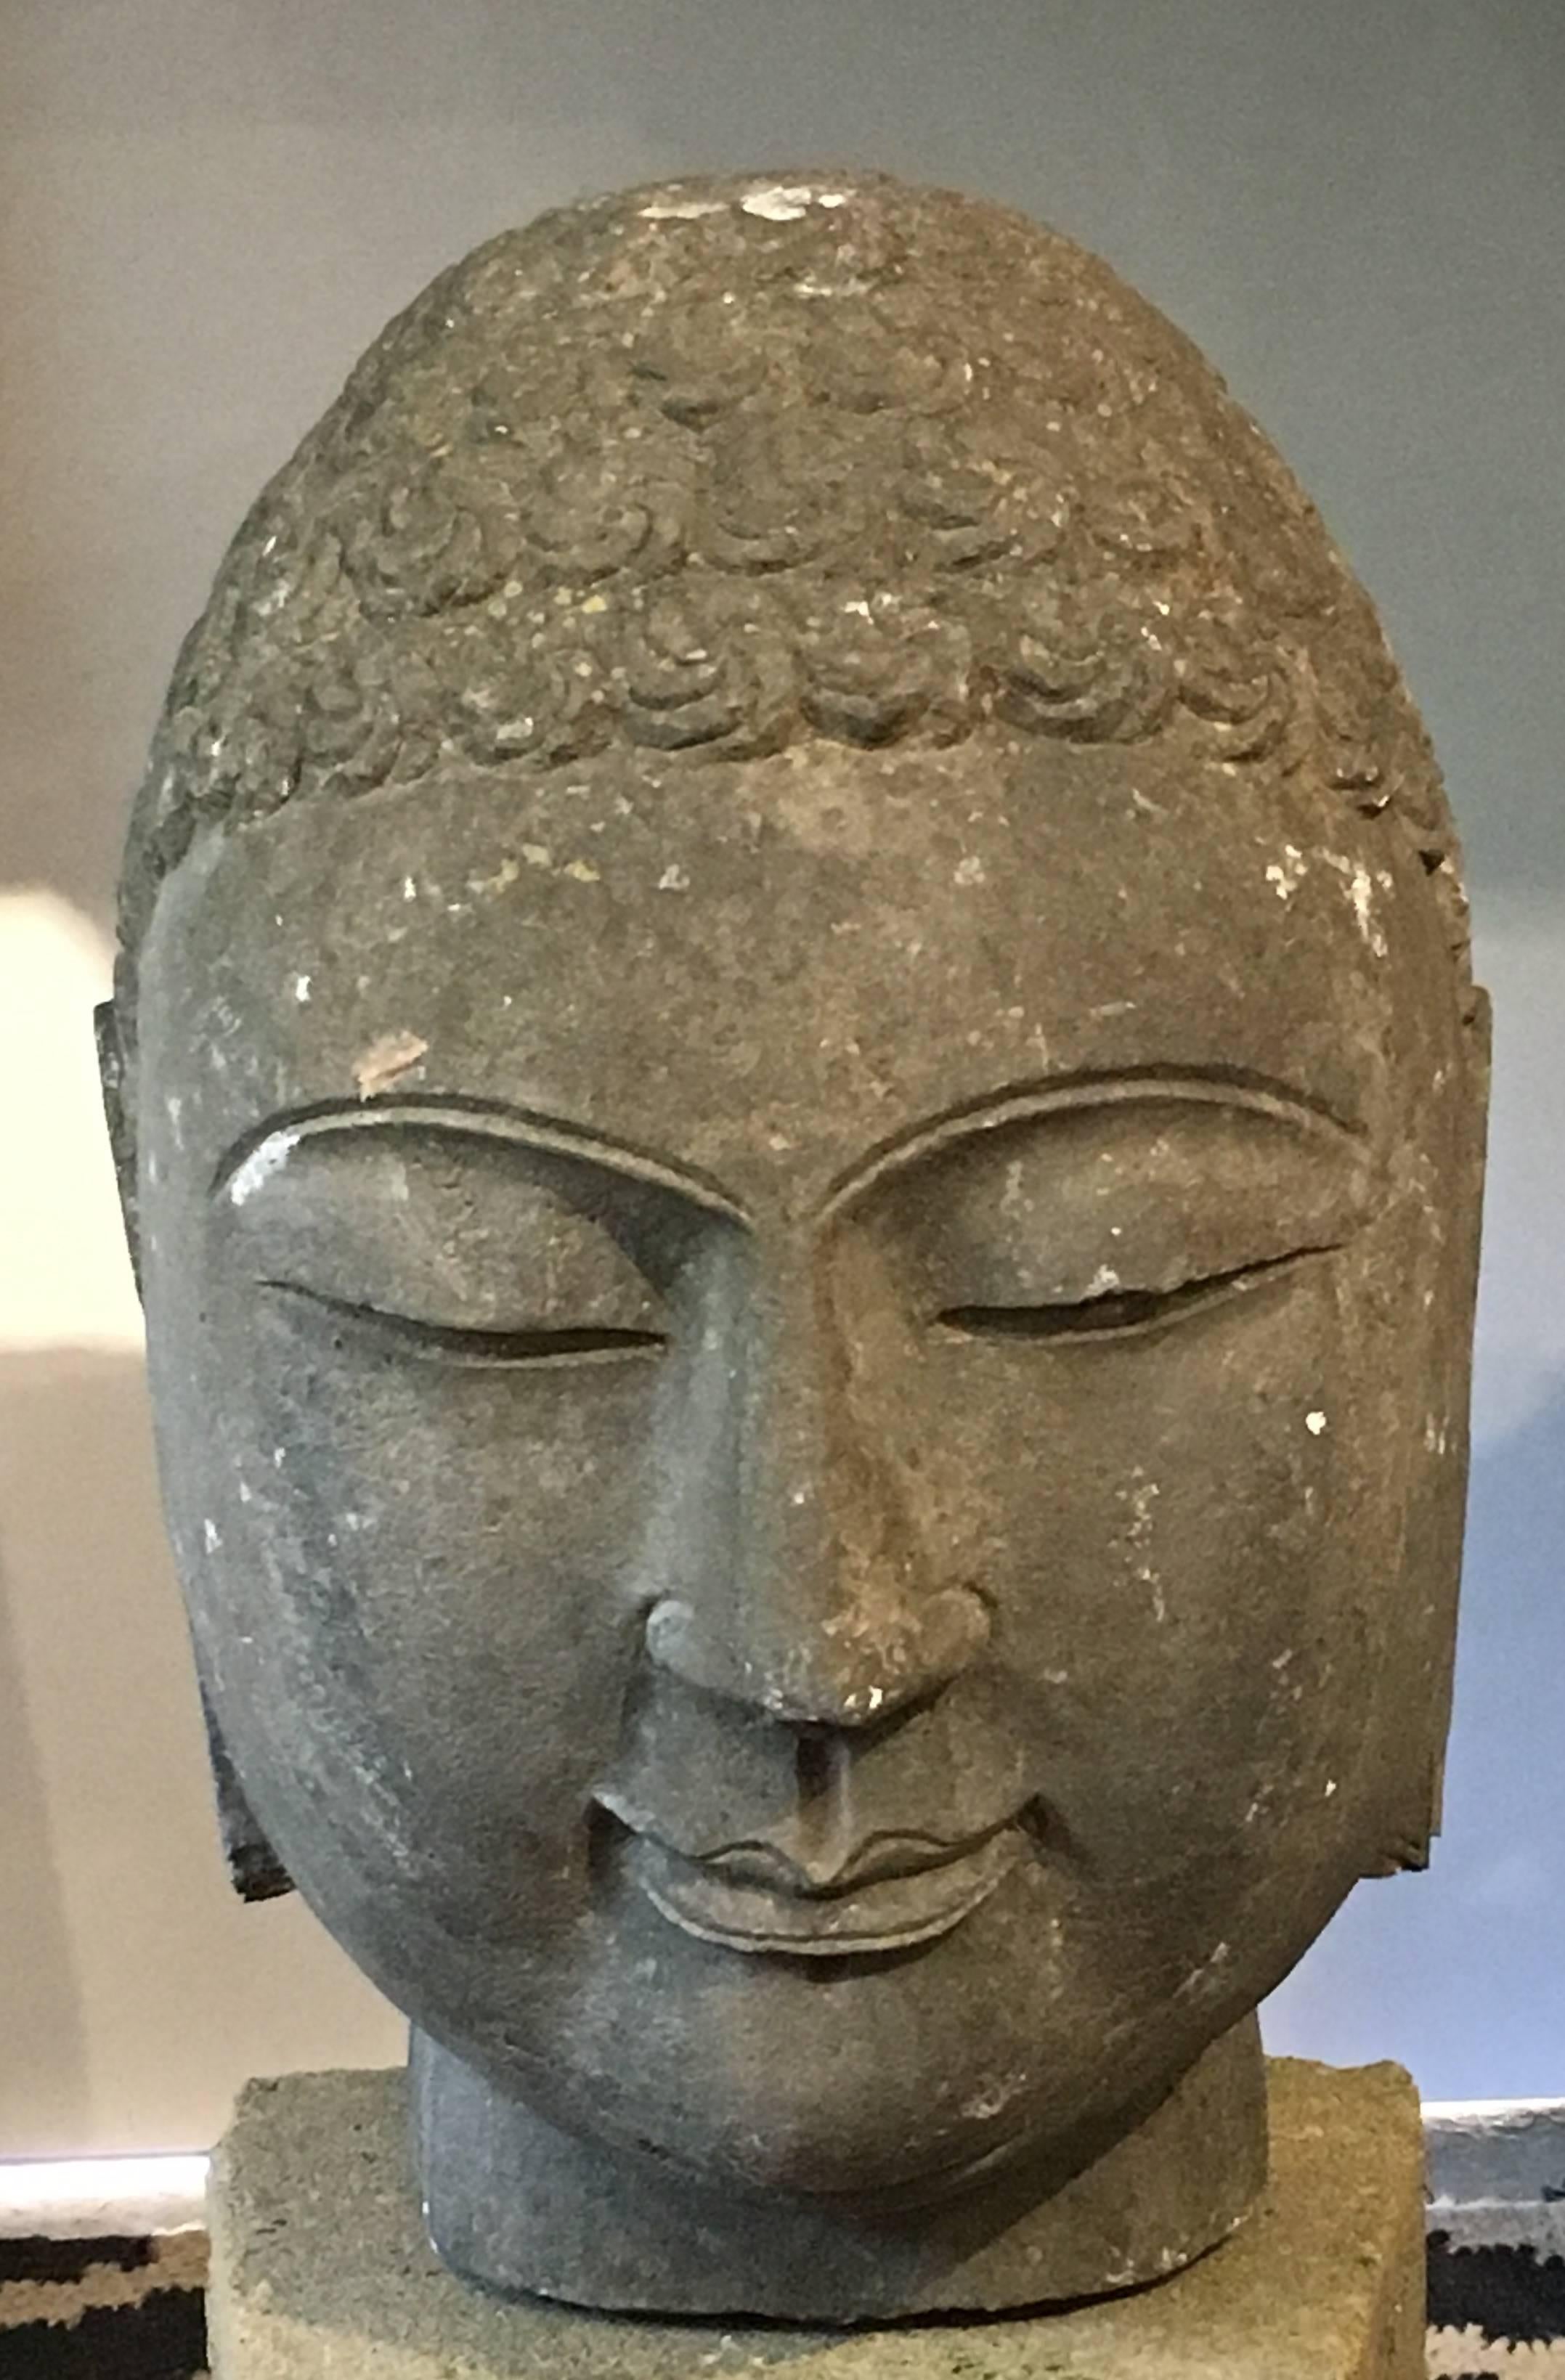 A sensitively carved limestone monumental head of the Buddha, China, mid-20th century.

The large carved limestone head displays a quiet sensuousness typical of the Northern Qi style, and follows Northern Qi stylistic conventions, with an oval